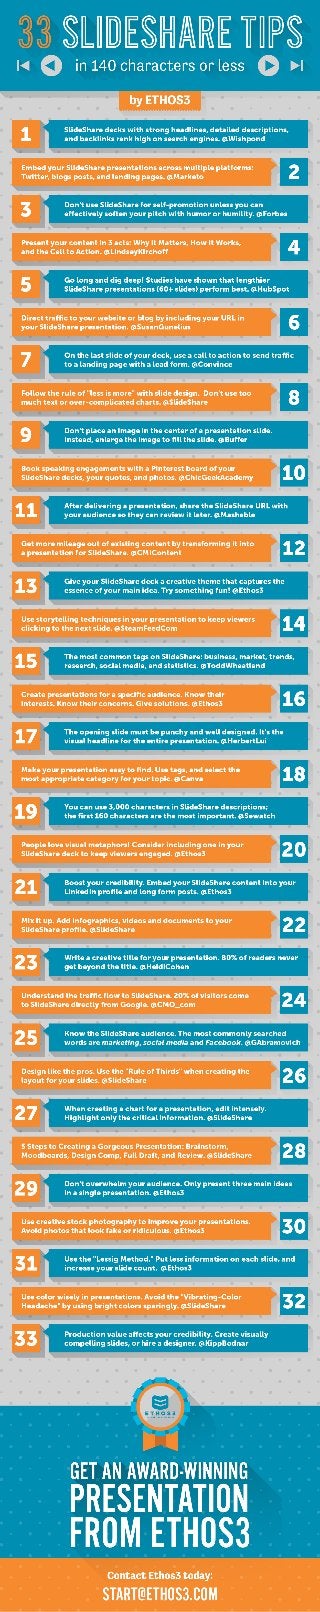 33 SlideShare Tips, in 140 characters or less